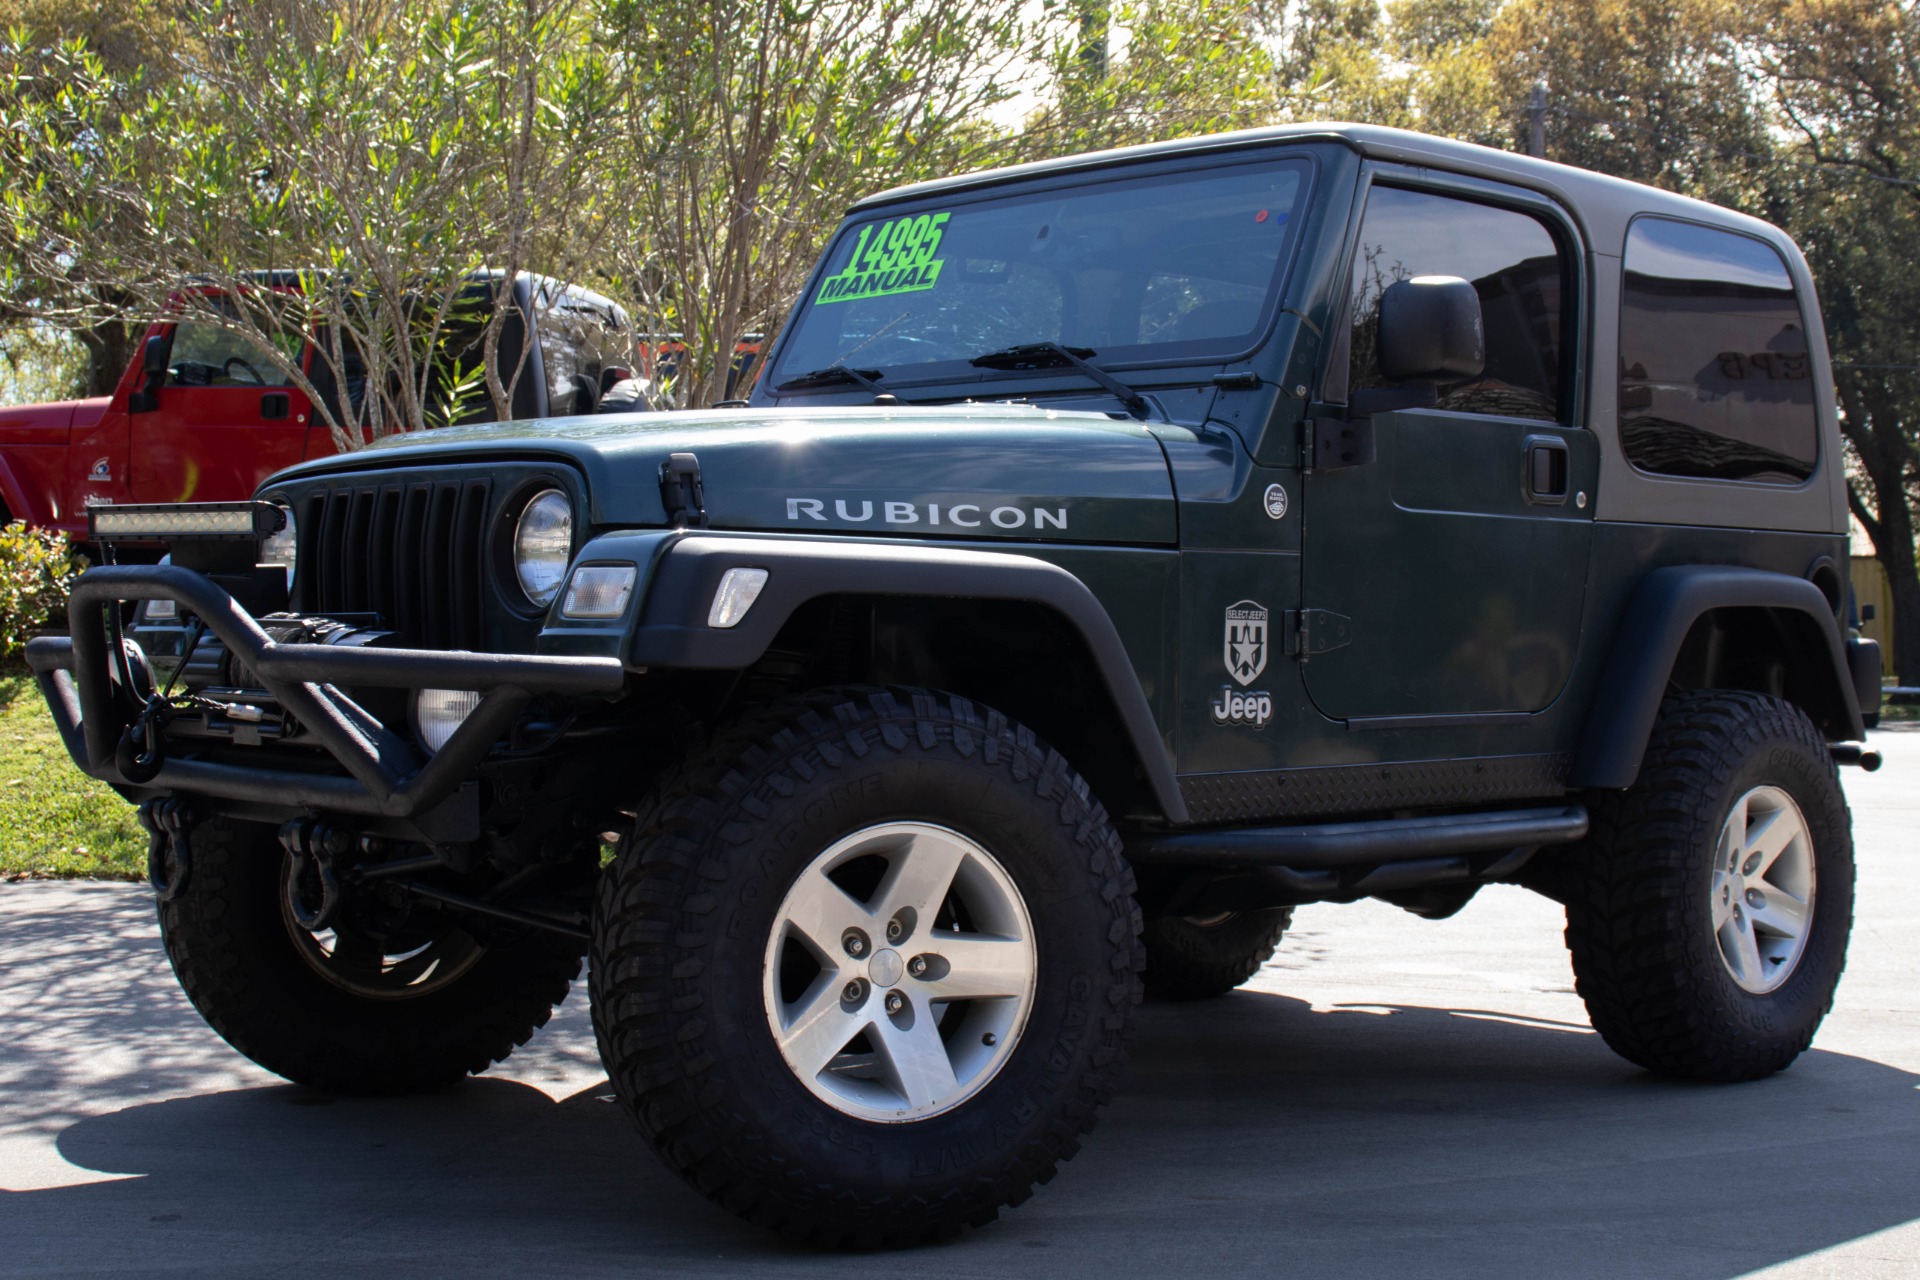 Used 2003 Jeep Wrangler Rubicon For Sale ($14,995) | Select Jeeps Inc.  Stock #334365